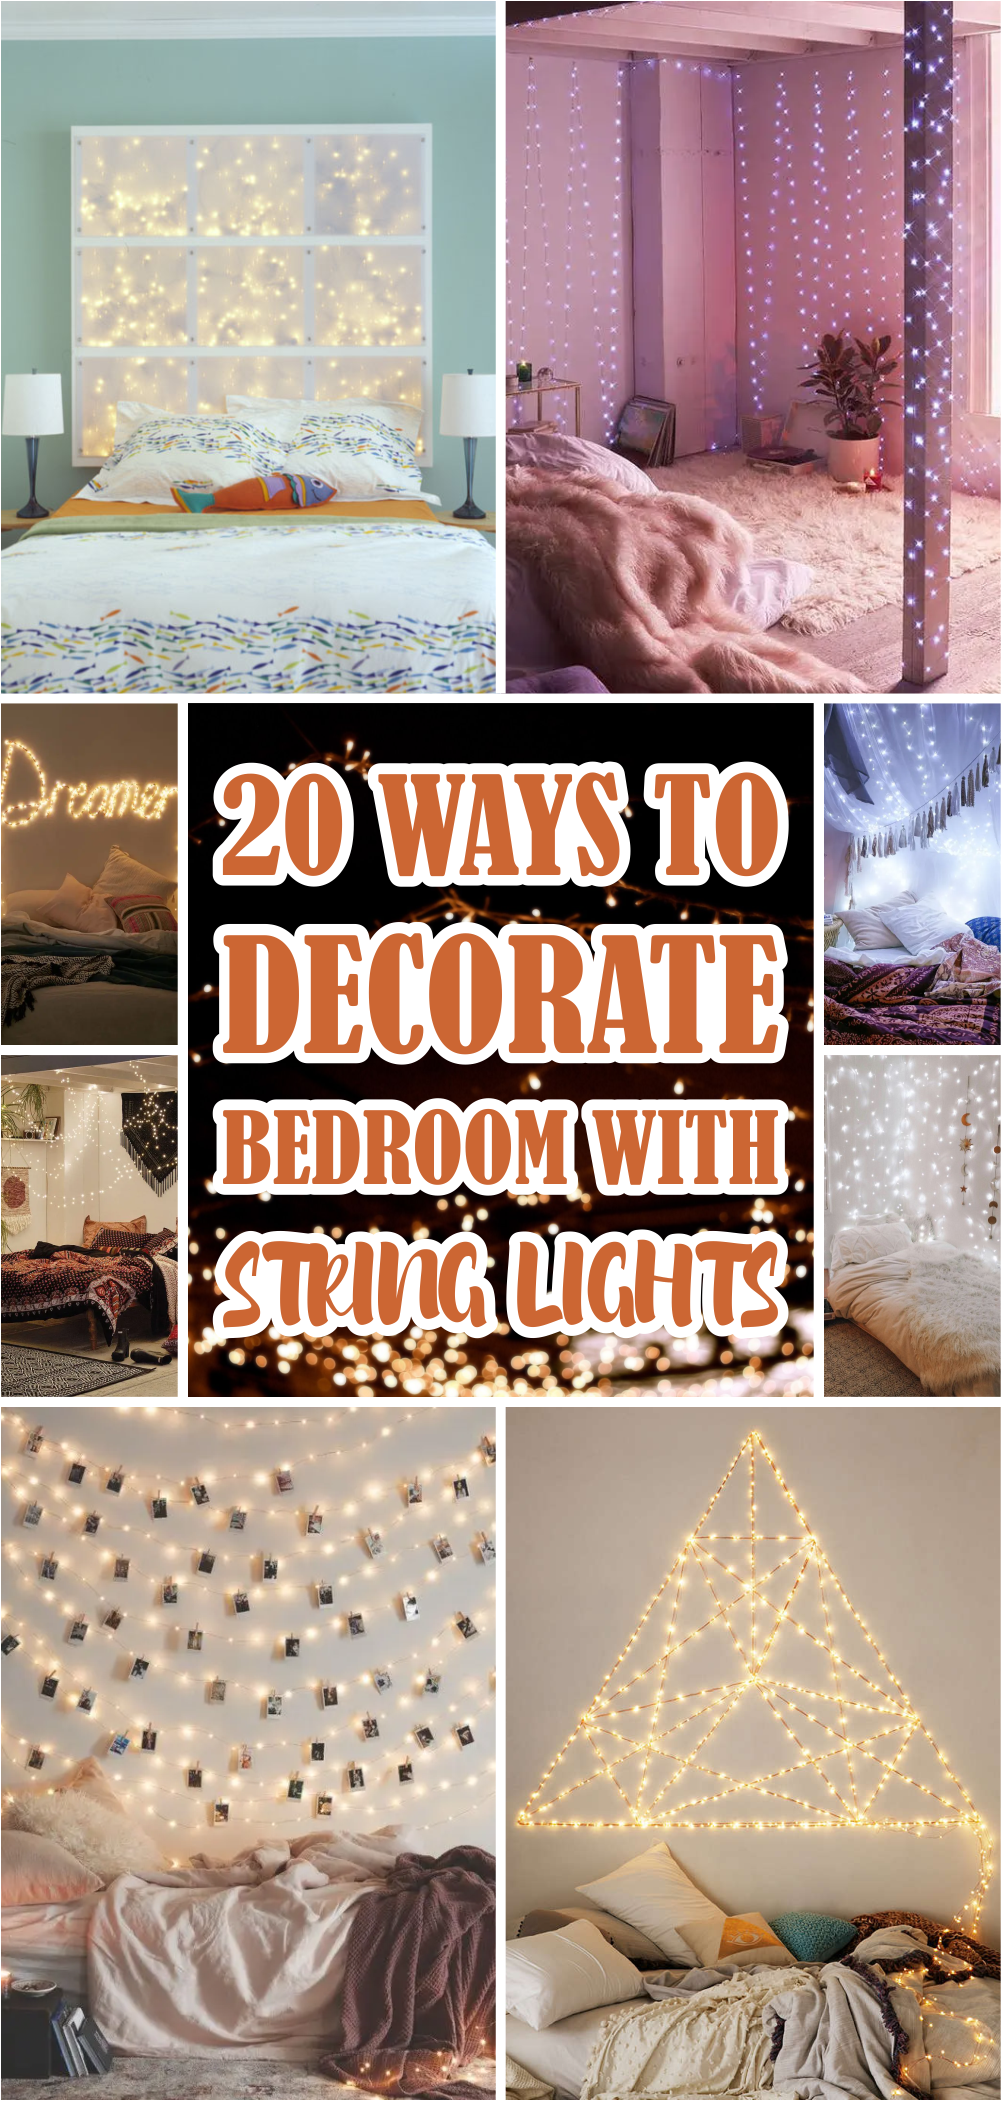 20 ways to decorate bedroom with string lights1